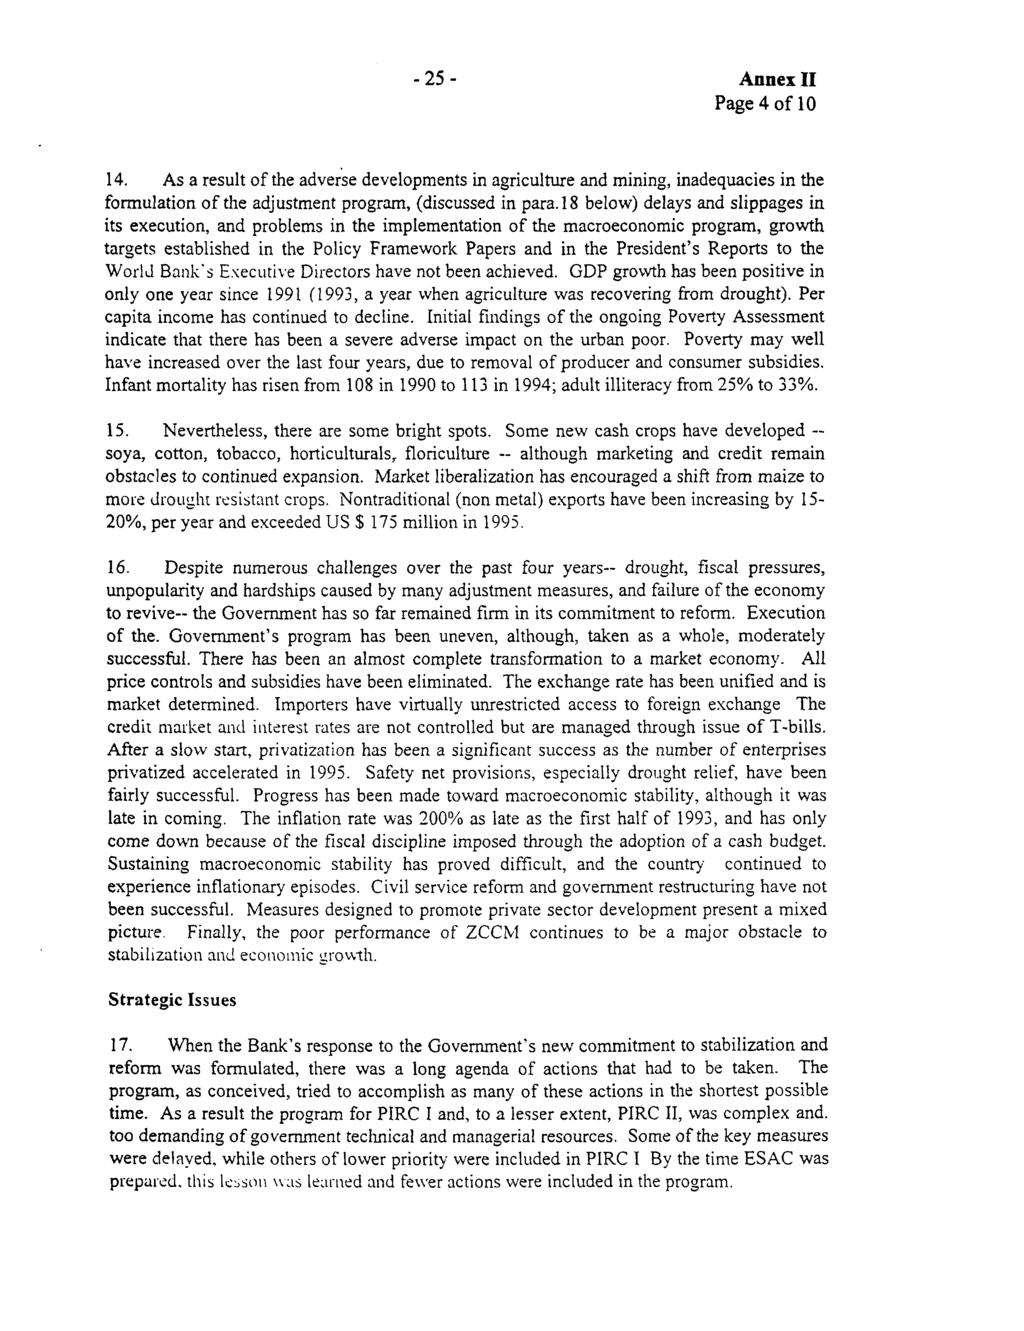 -25 - Annex II Page 4 of 10 14. As a result of the adverse developments in agriculture and mining, inadequacies in the forrnulation of the adjustment program, (discussed in para.